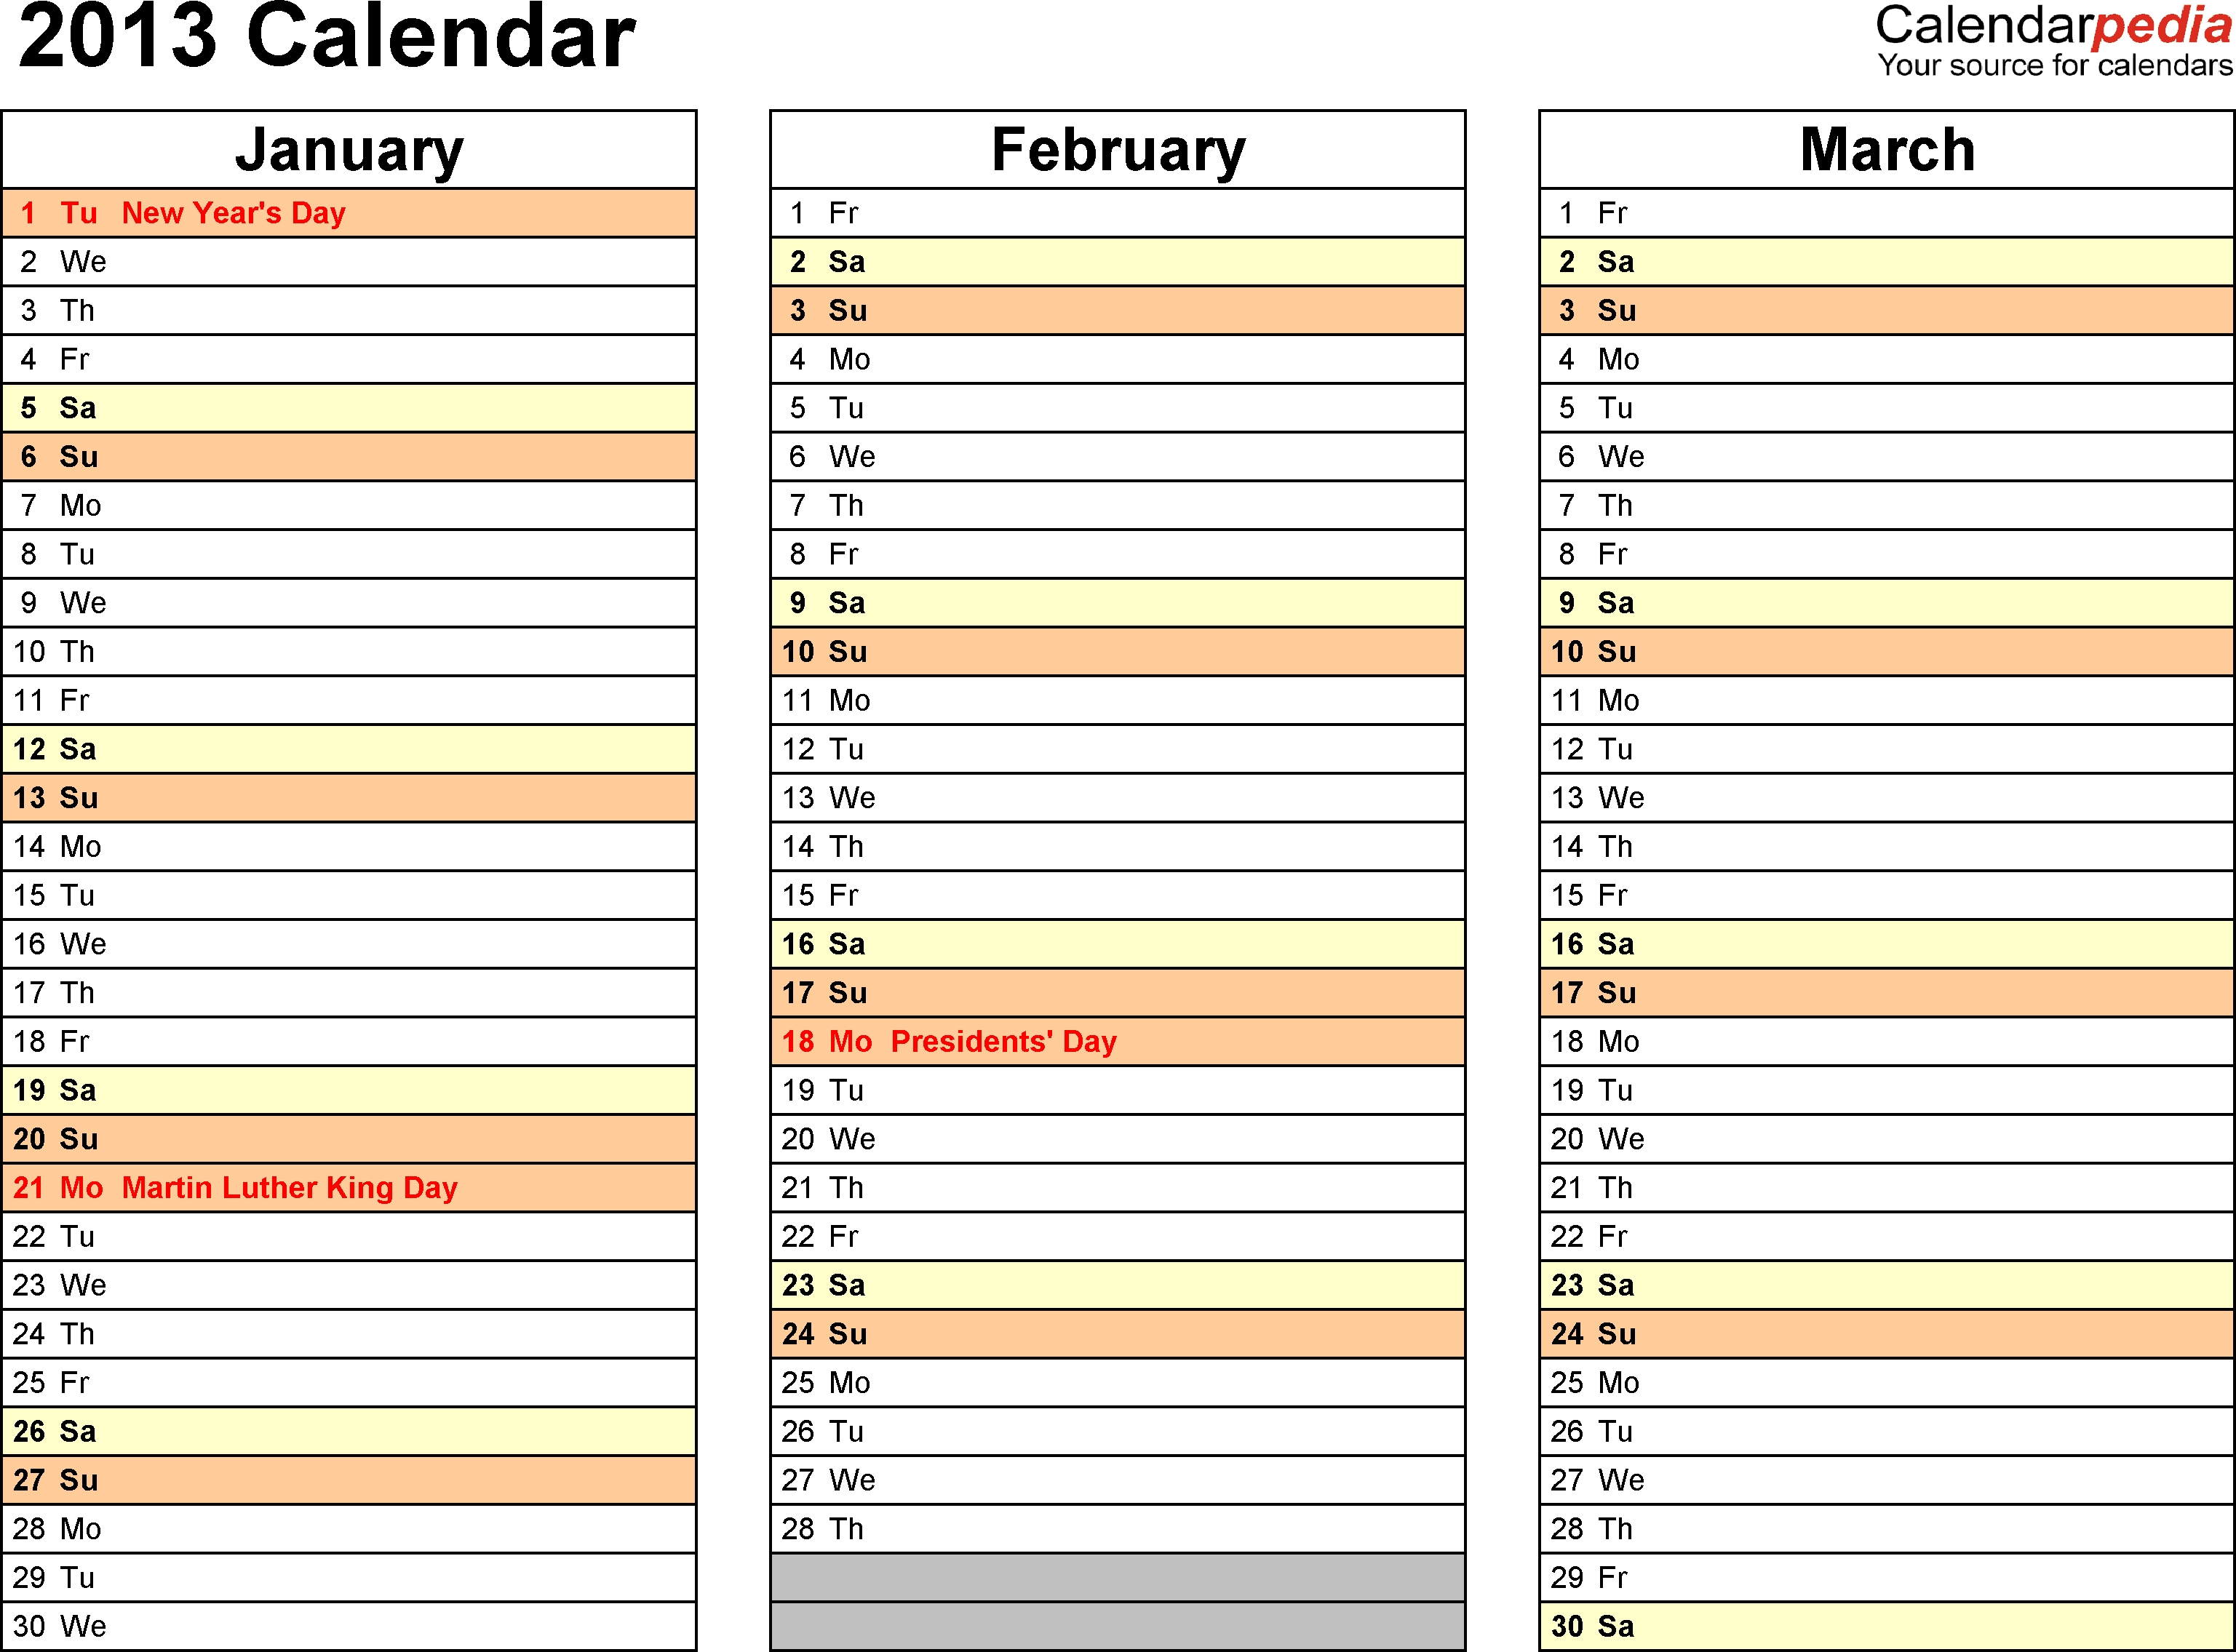 2013 Calendar Word - 11 Free Printable Word Templates (.docx) throughout 3 Months In One Calenadar